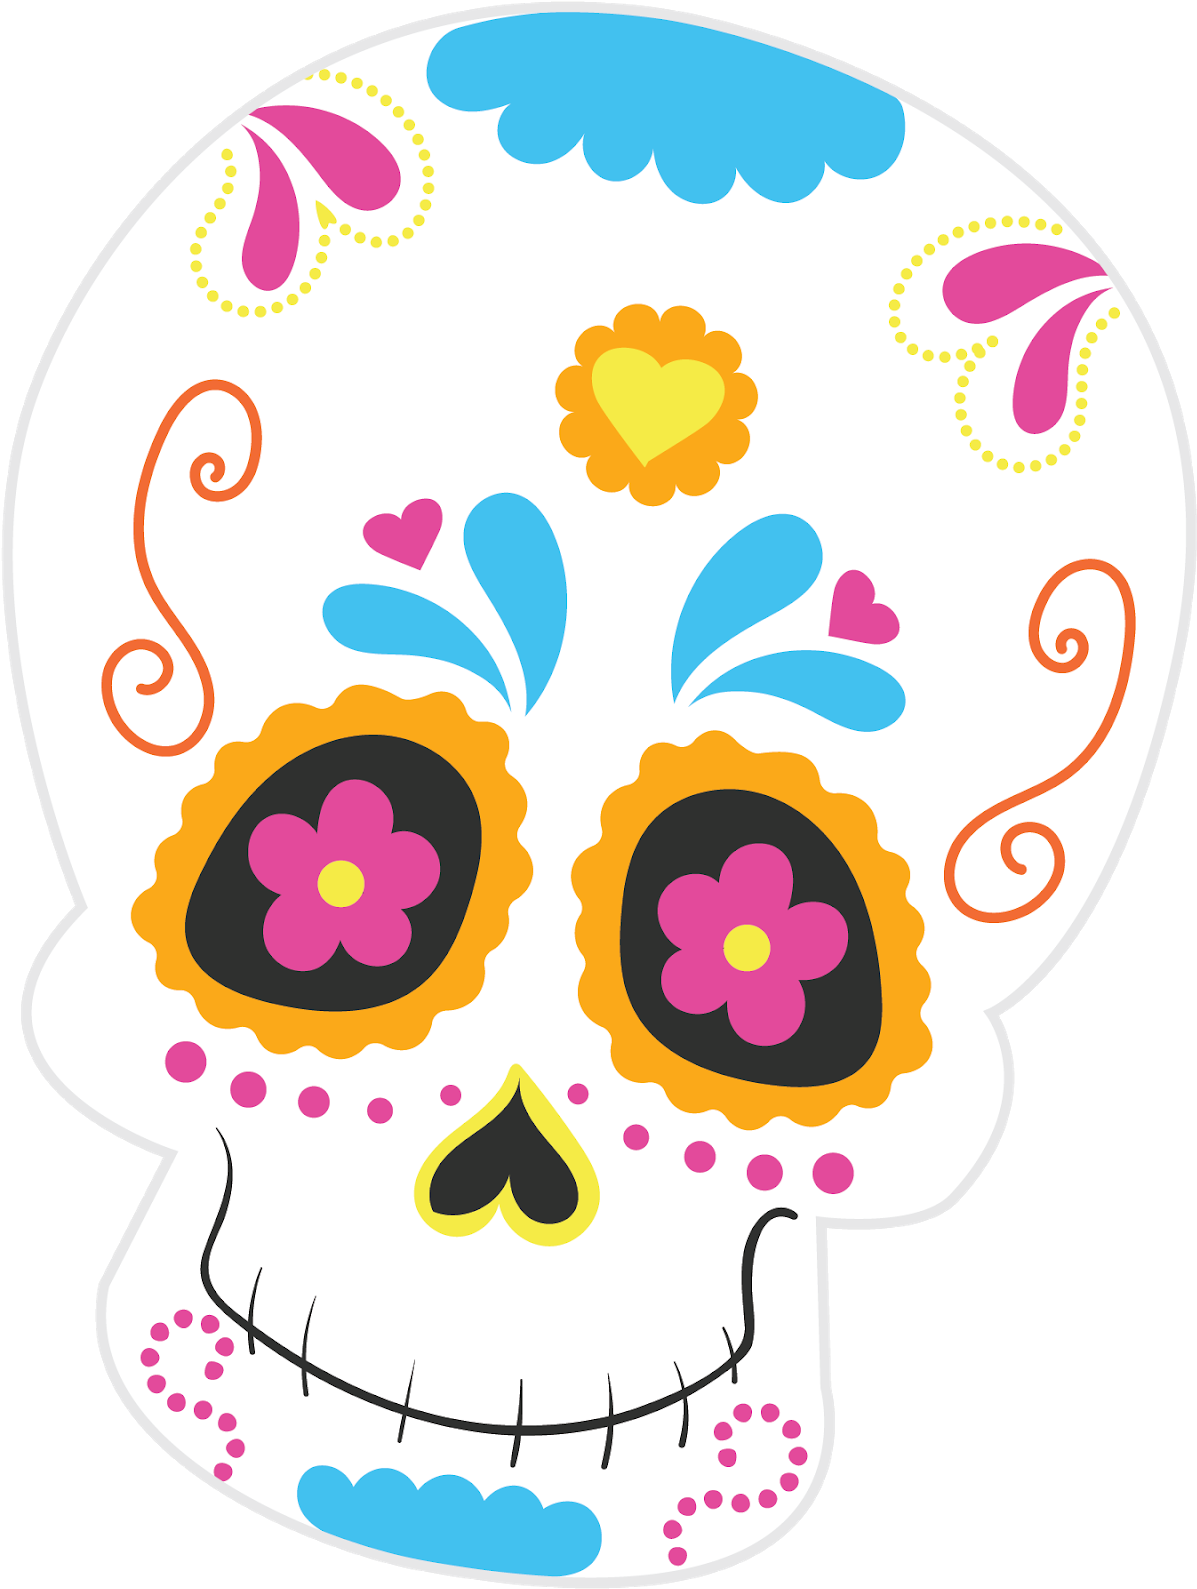 So, For The Next Year They Kept Looking For Ideas On - Dia De Los Muertos Invitation Template (1600x1600)